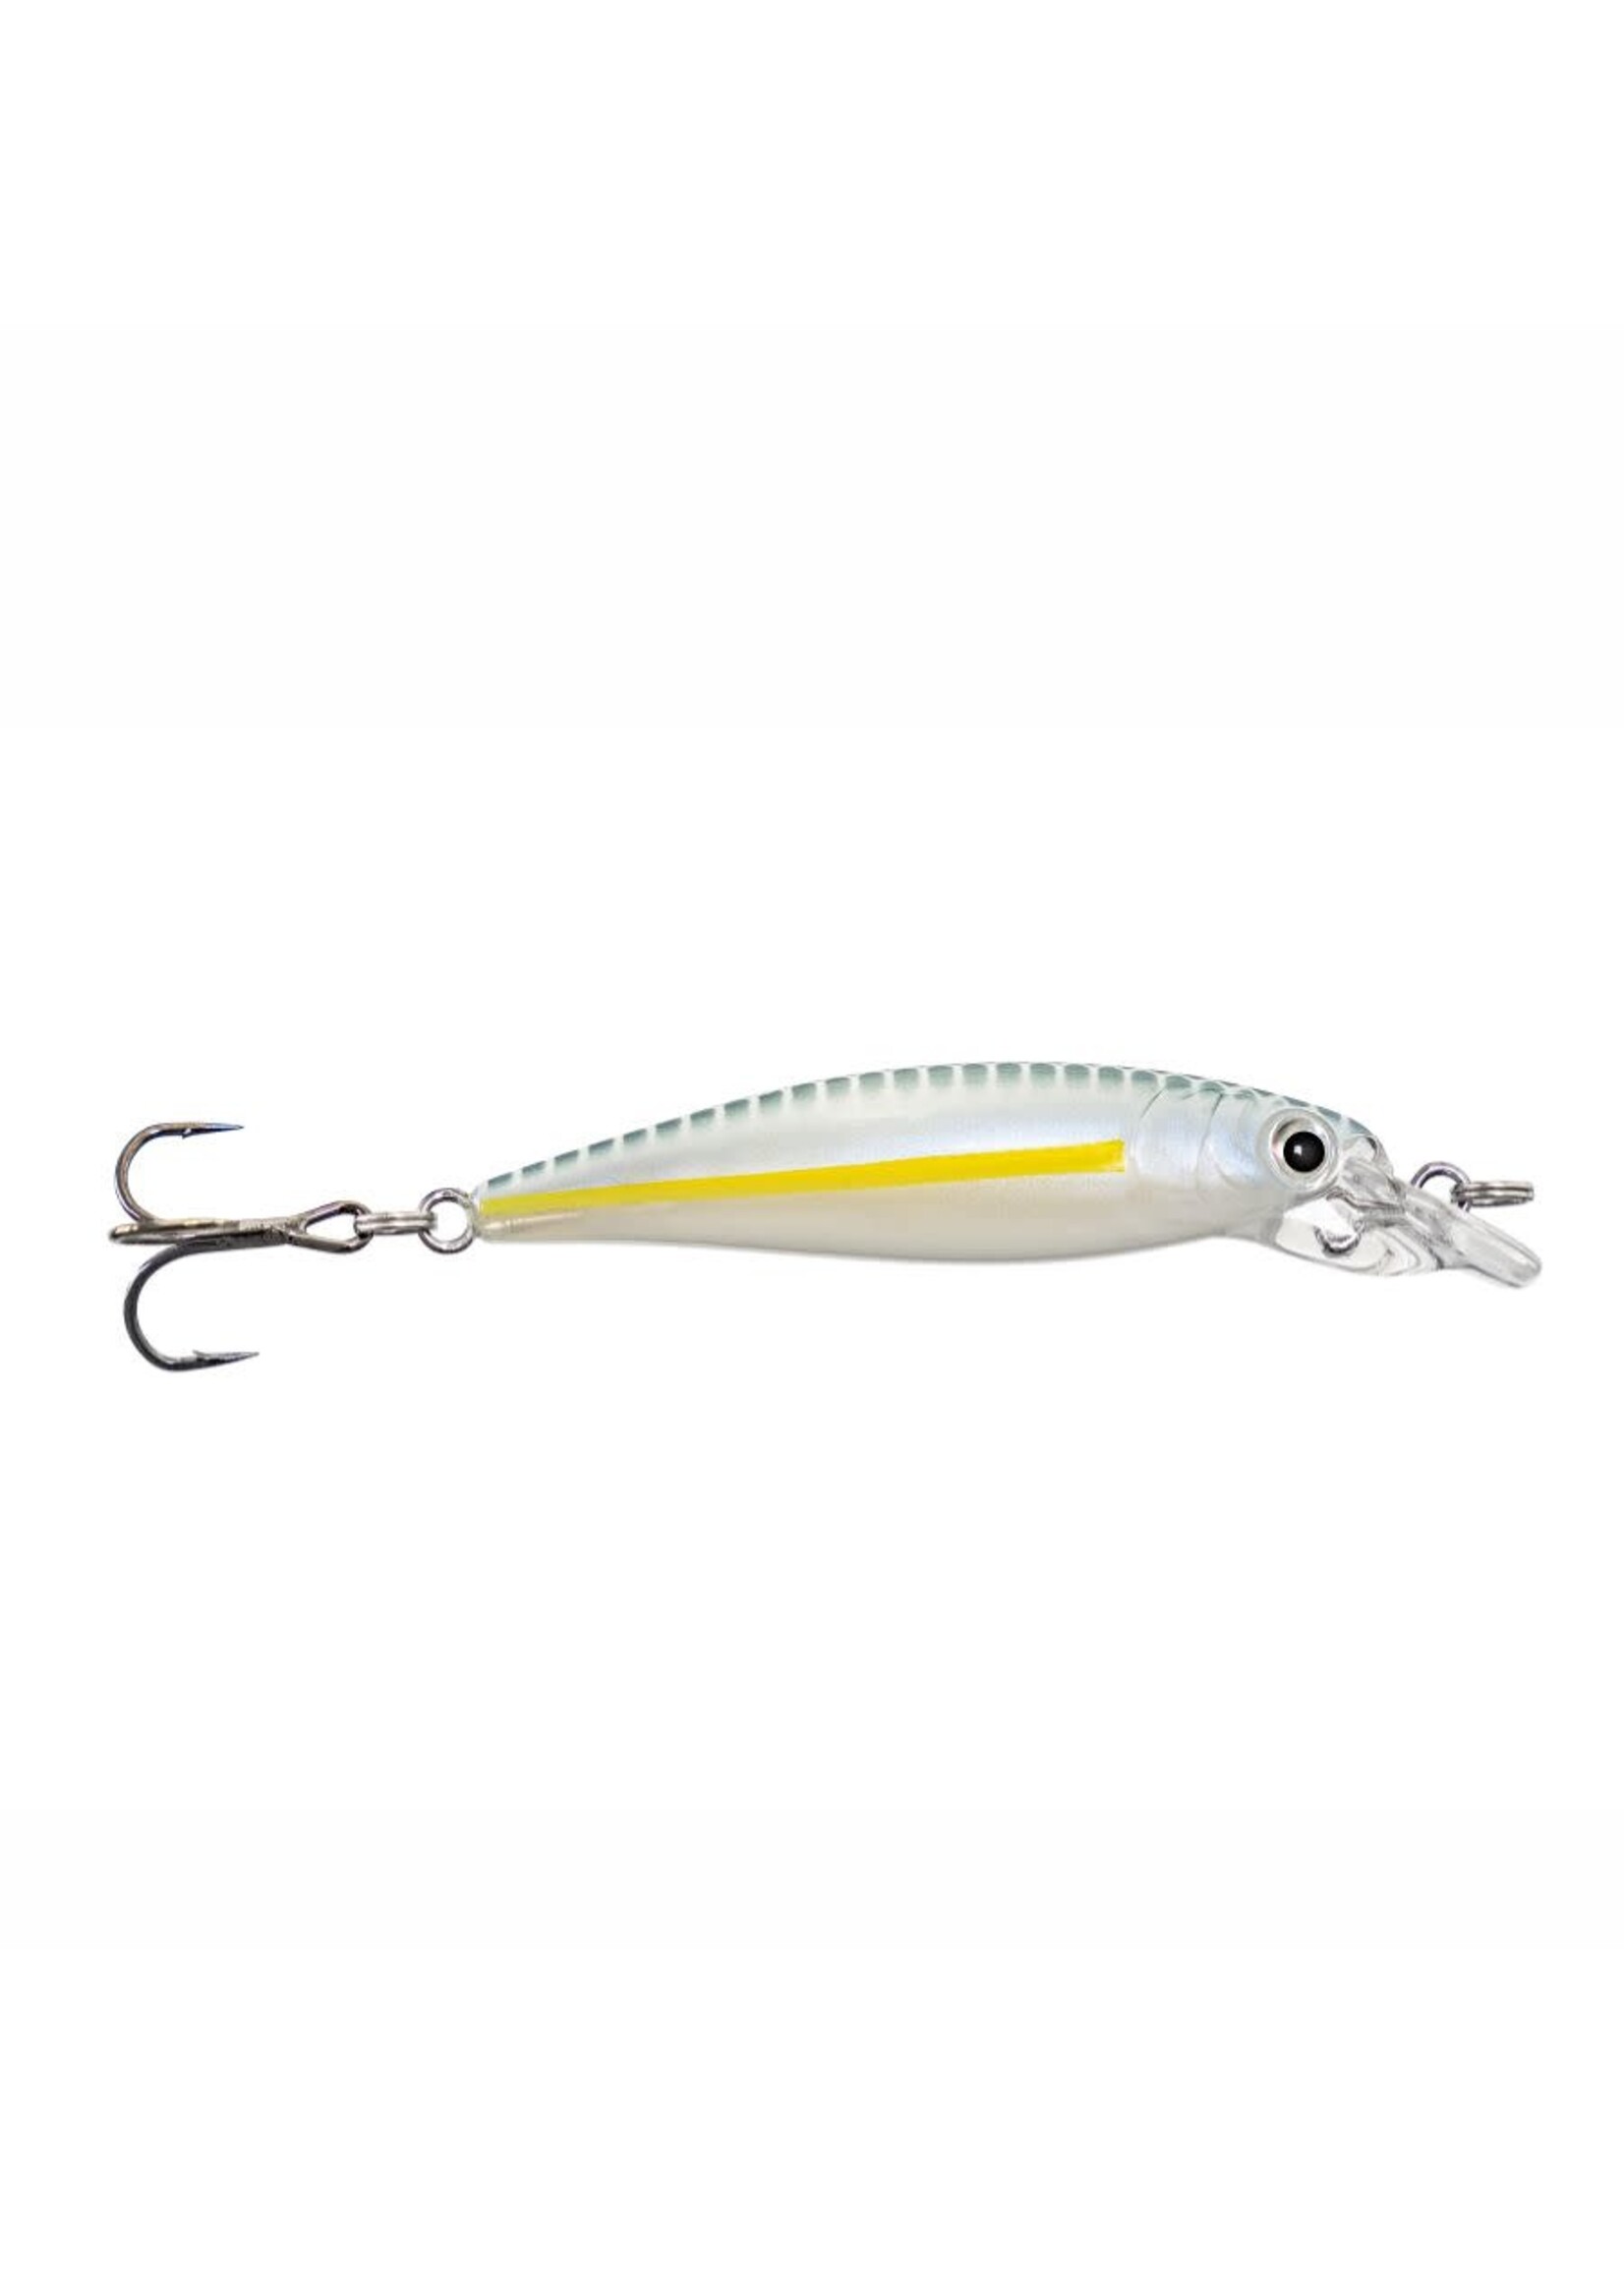 Fishing Lure, Crankbait, Dynamic Lures HD TROUT (Ken's Redfin Shiner) Redfin